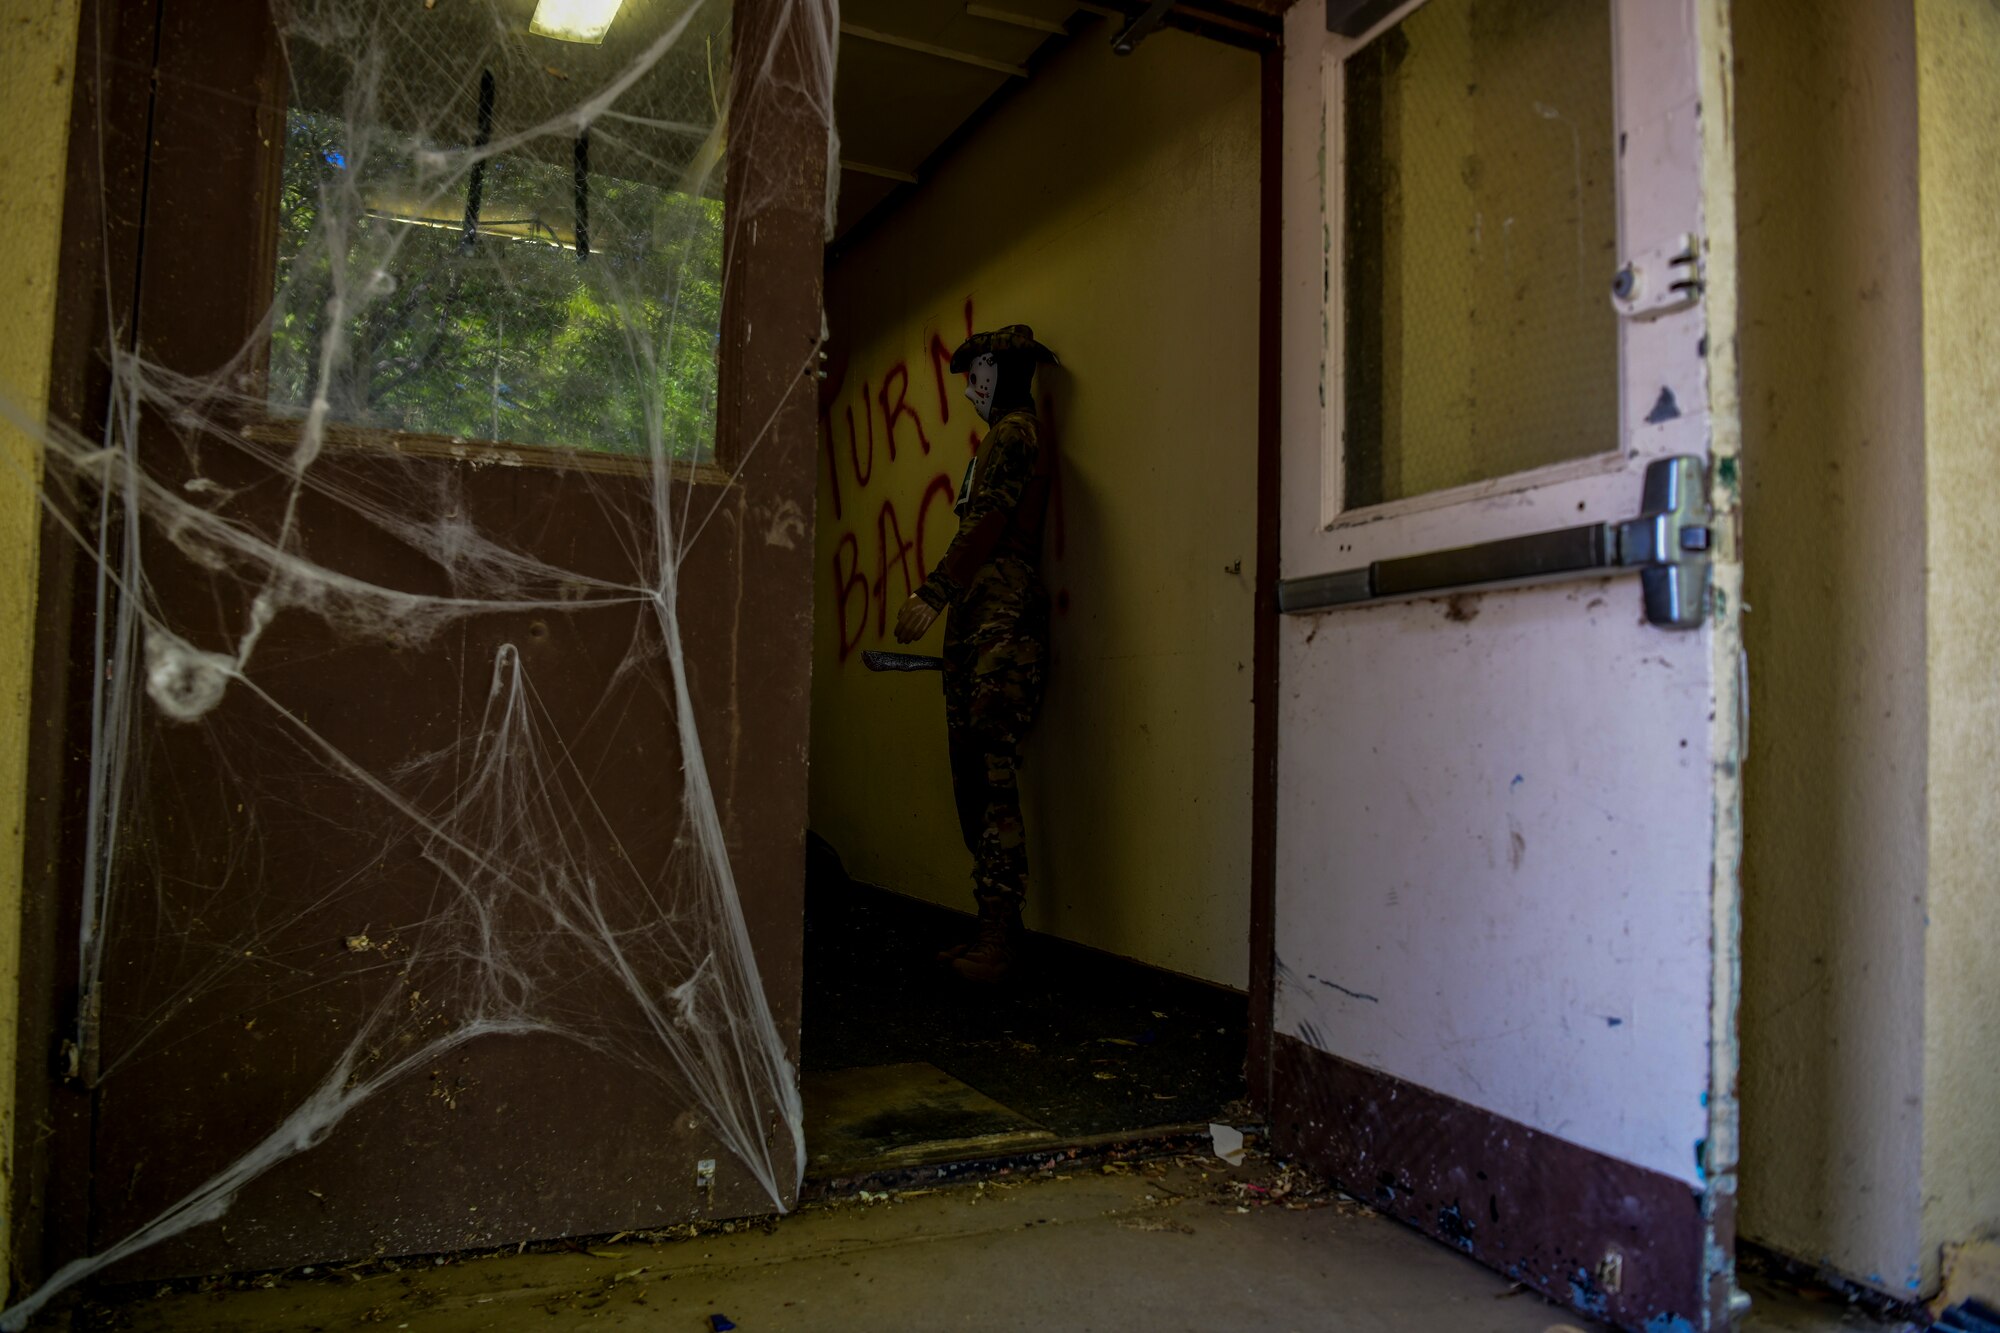 A mannequin stands guard at the entrance of the haunted house at Beale Air Force Base